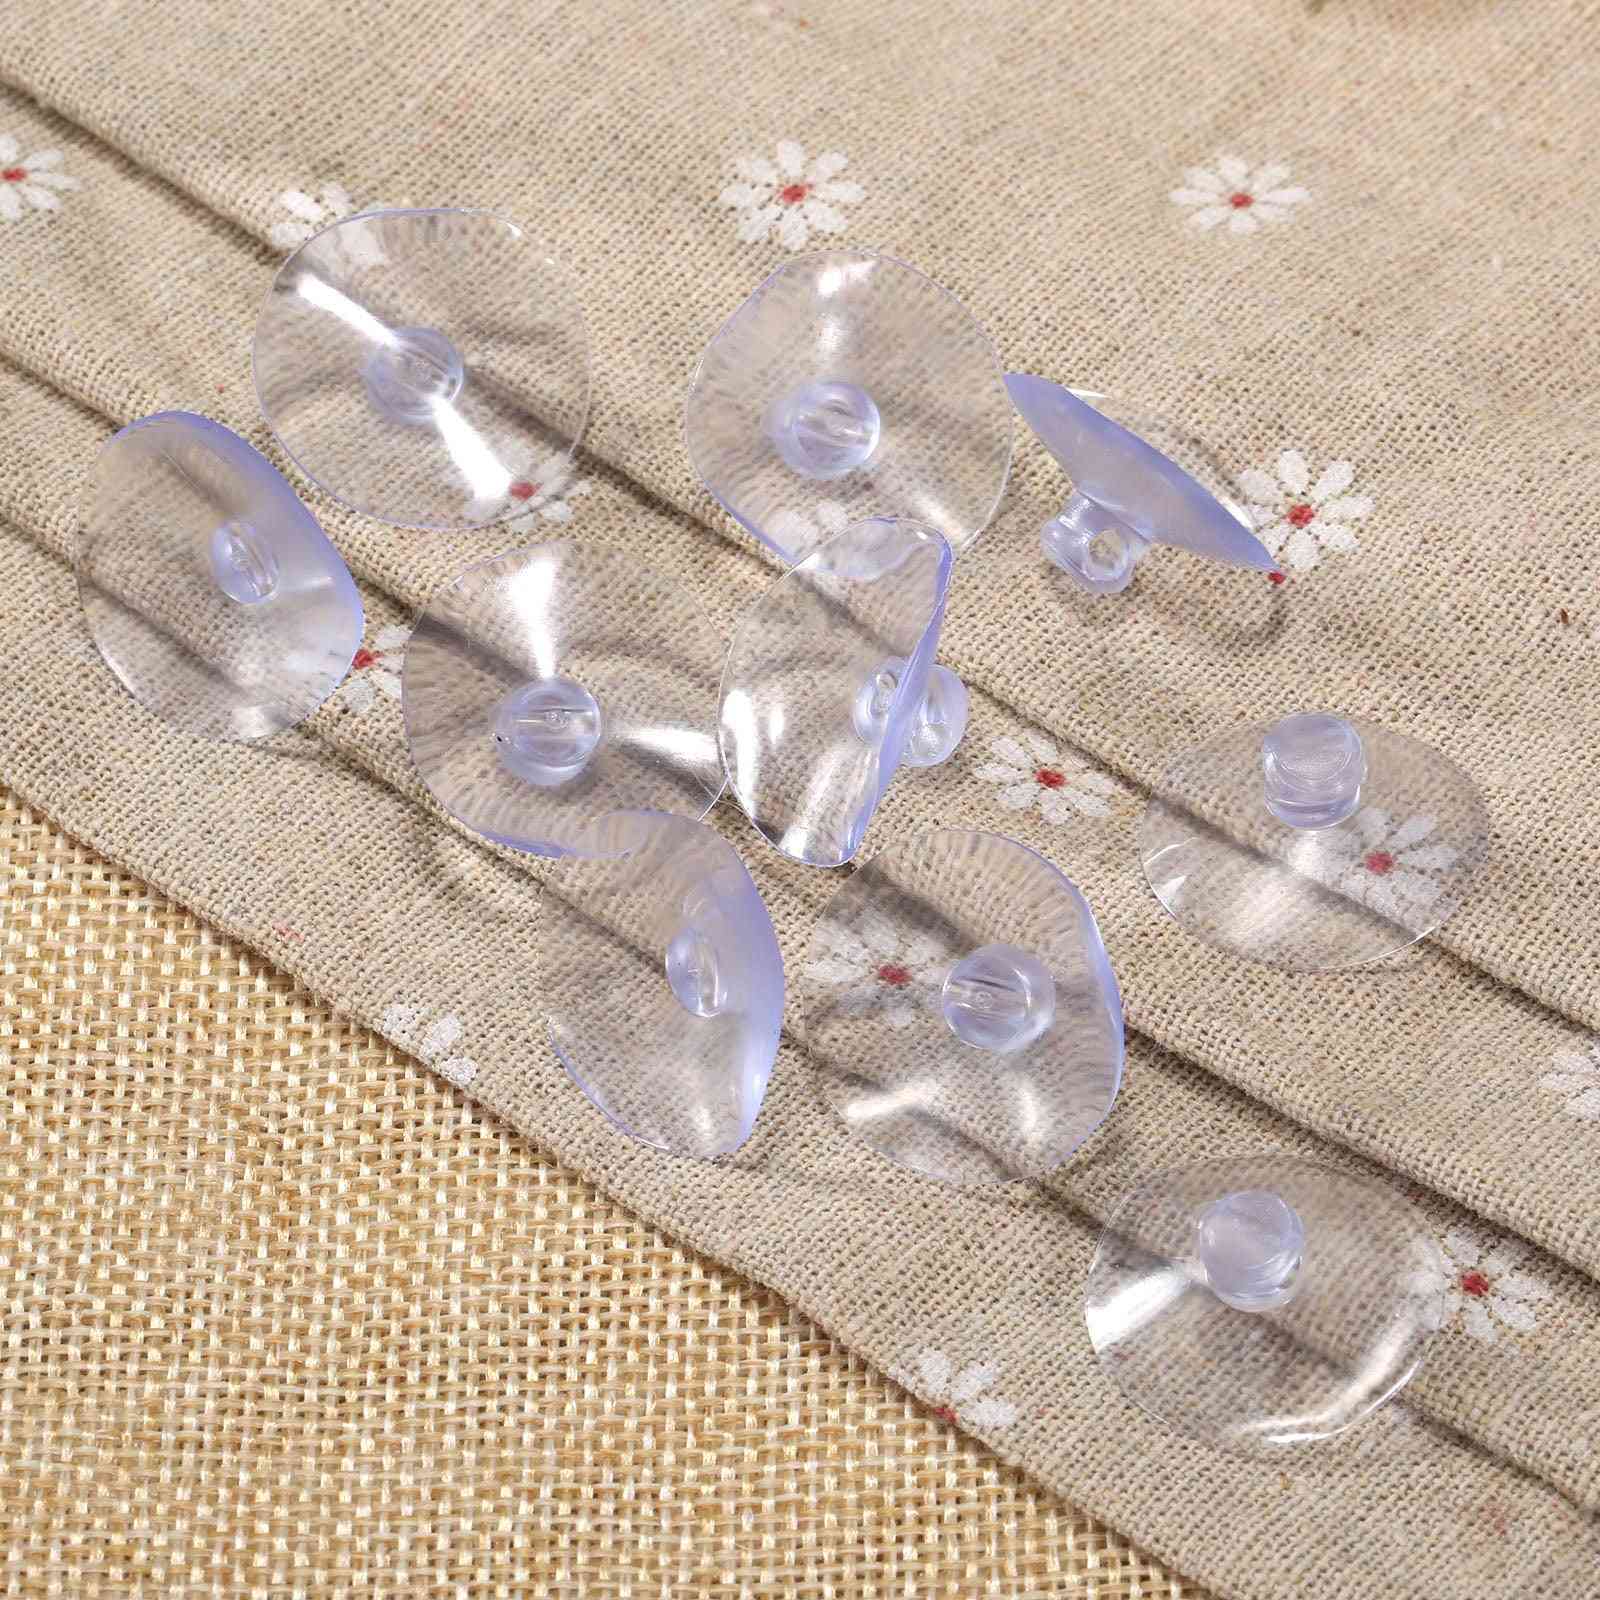 Clear Suction Cups- Hook For Window, Kitchen, Bathroom, Car And Glass